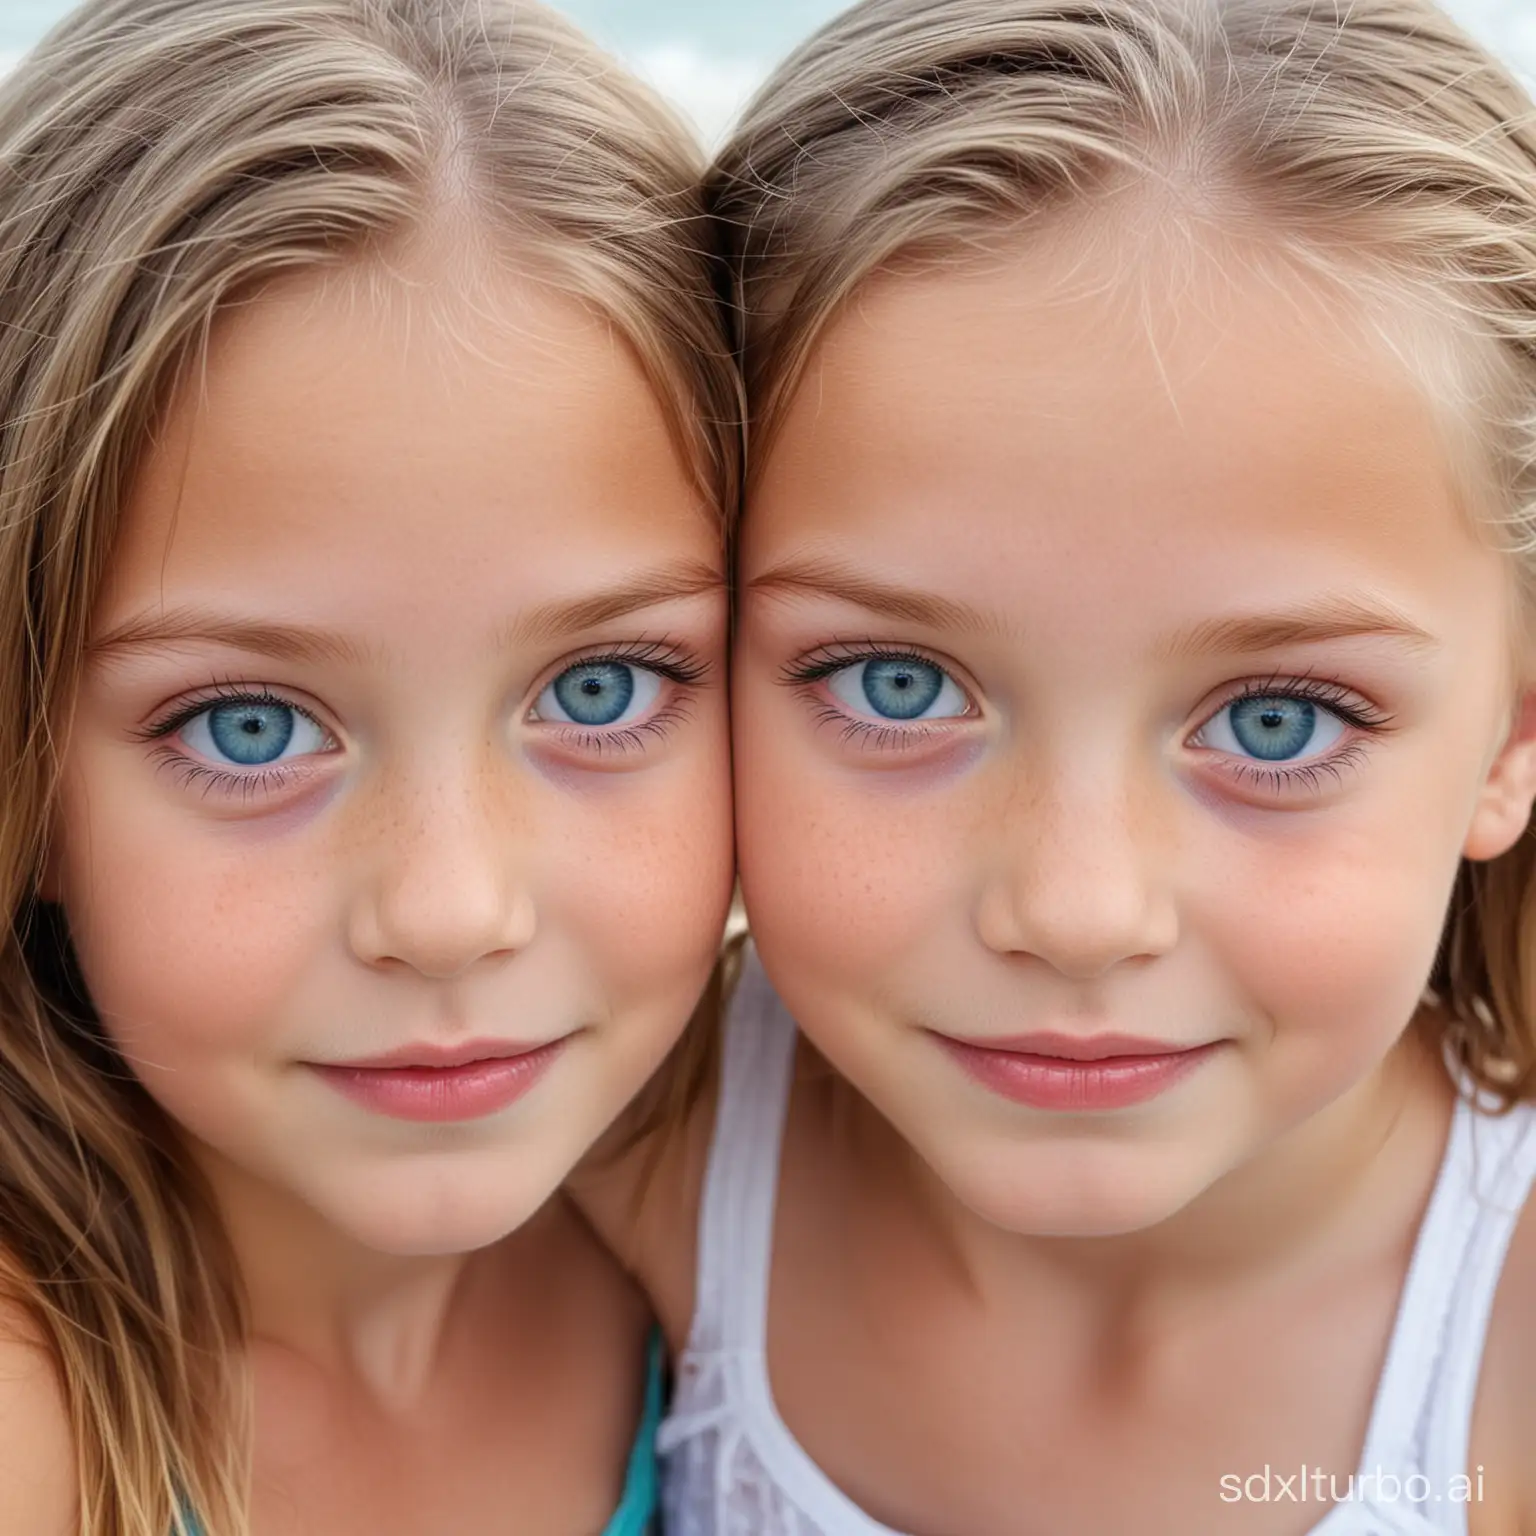 7 year old girls with blue eyes on the beach